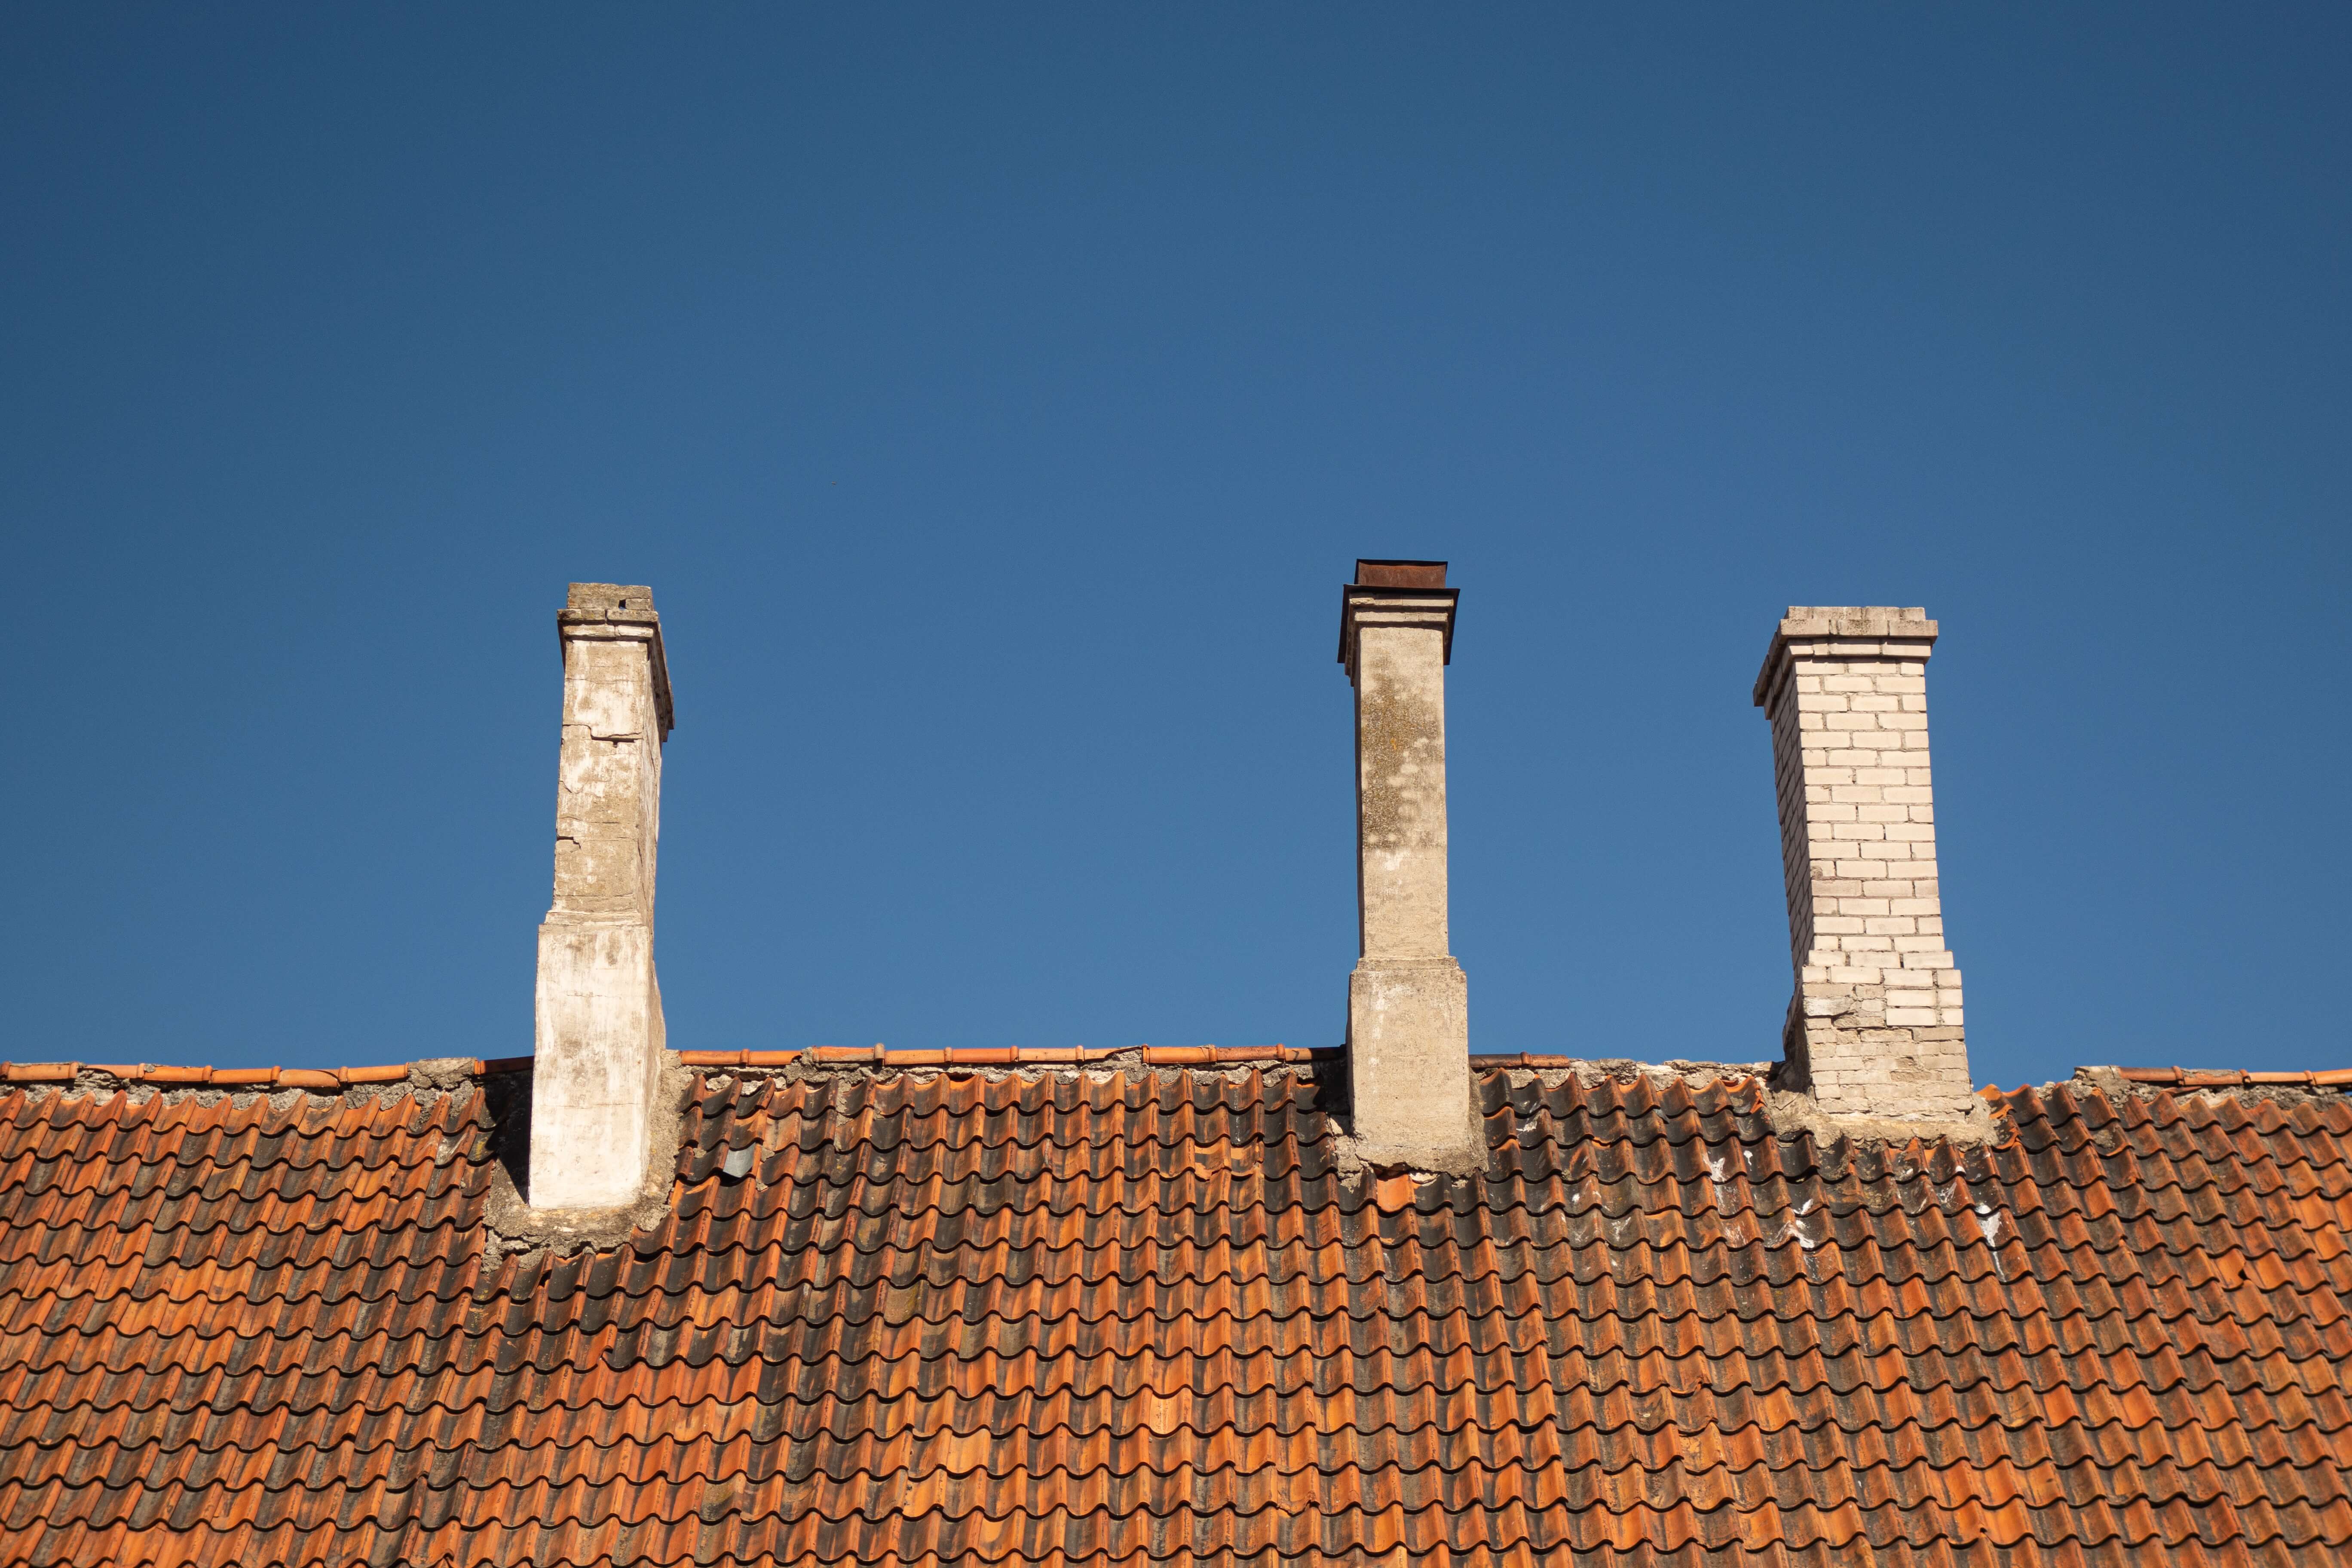 Tile roof with 3 chimneys